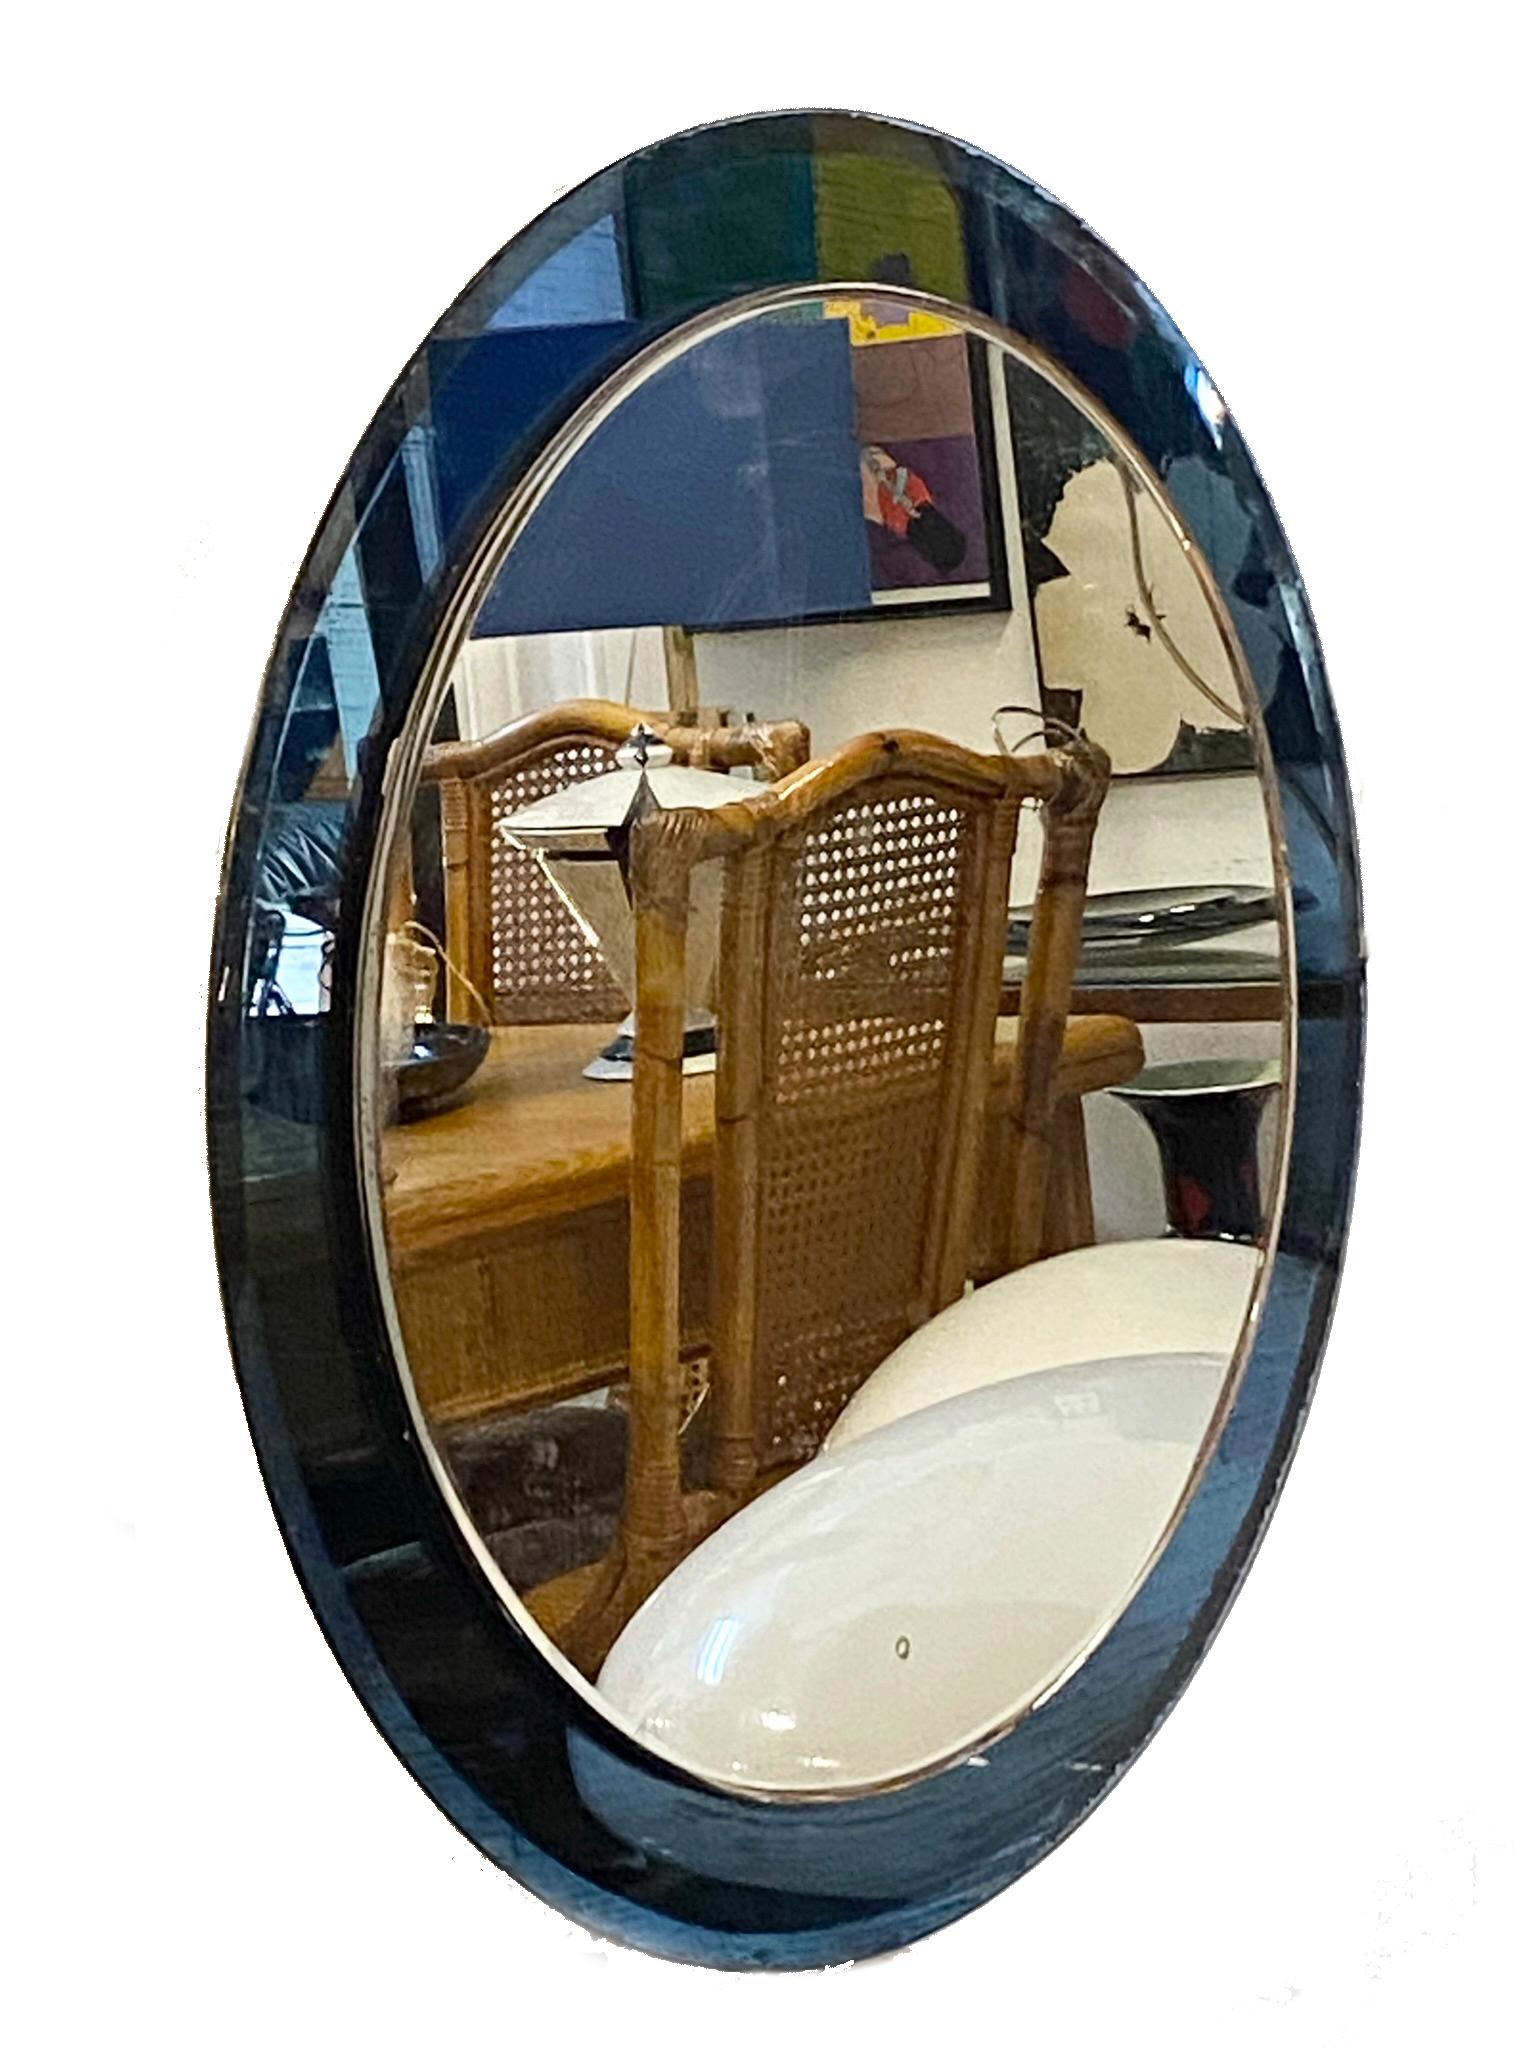 Incredible mid-century round double tier mirror with blue glass frame. This wonderful piece was produced in Italy in the 1960s and is attributed to Crystal Art.
In its pure and essential mid-century design and lines, this wonderful piece features a